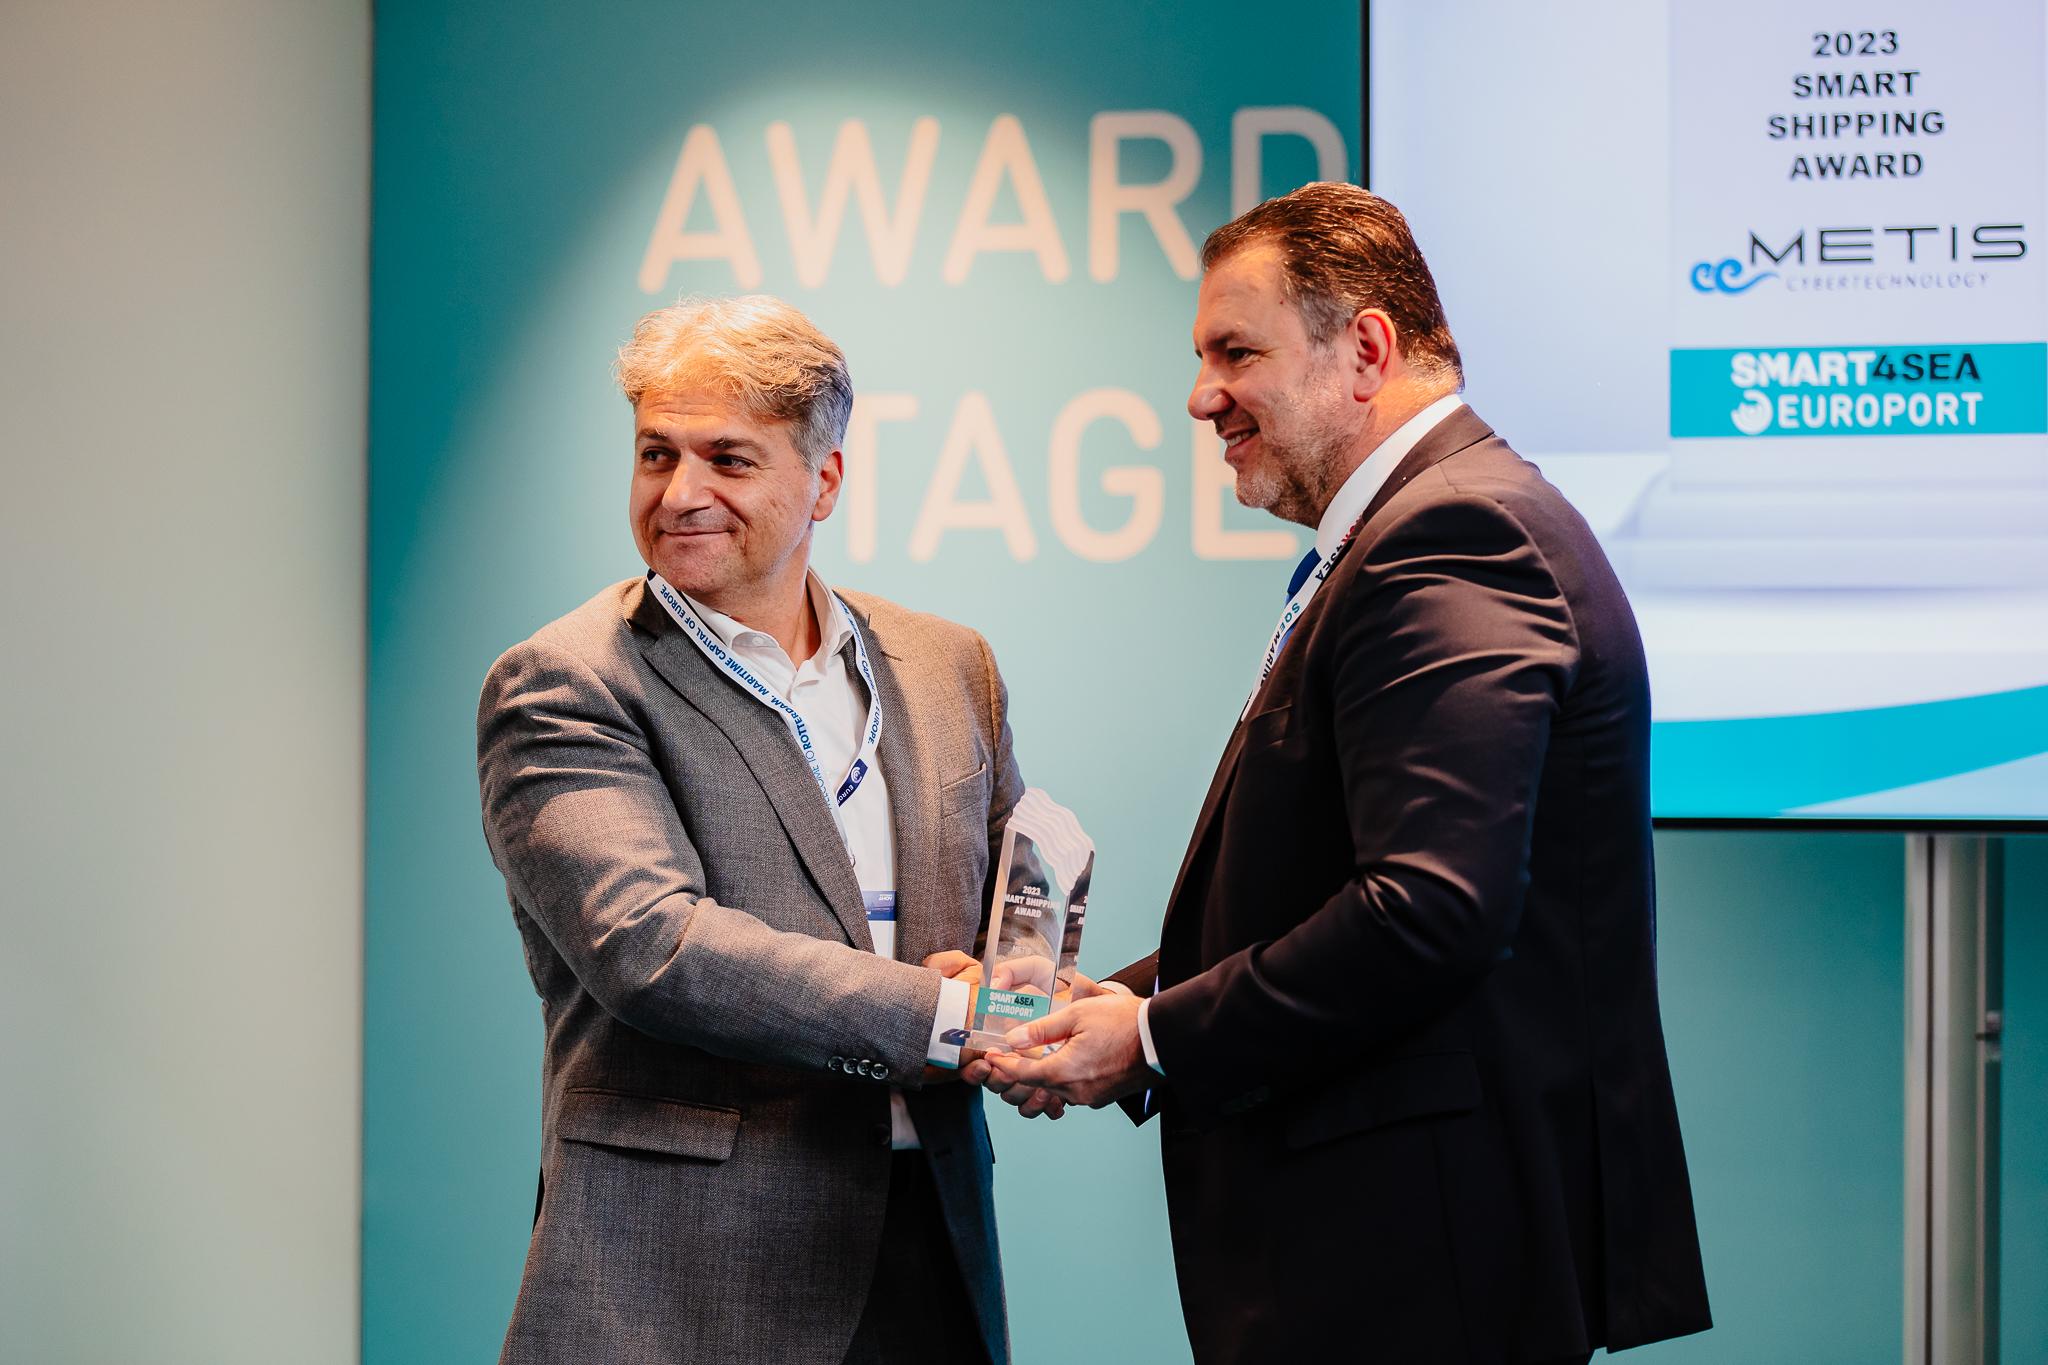 Smart Shipping Awards: Winners Honored for Innovation in Maritime Technology